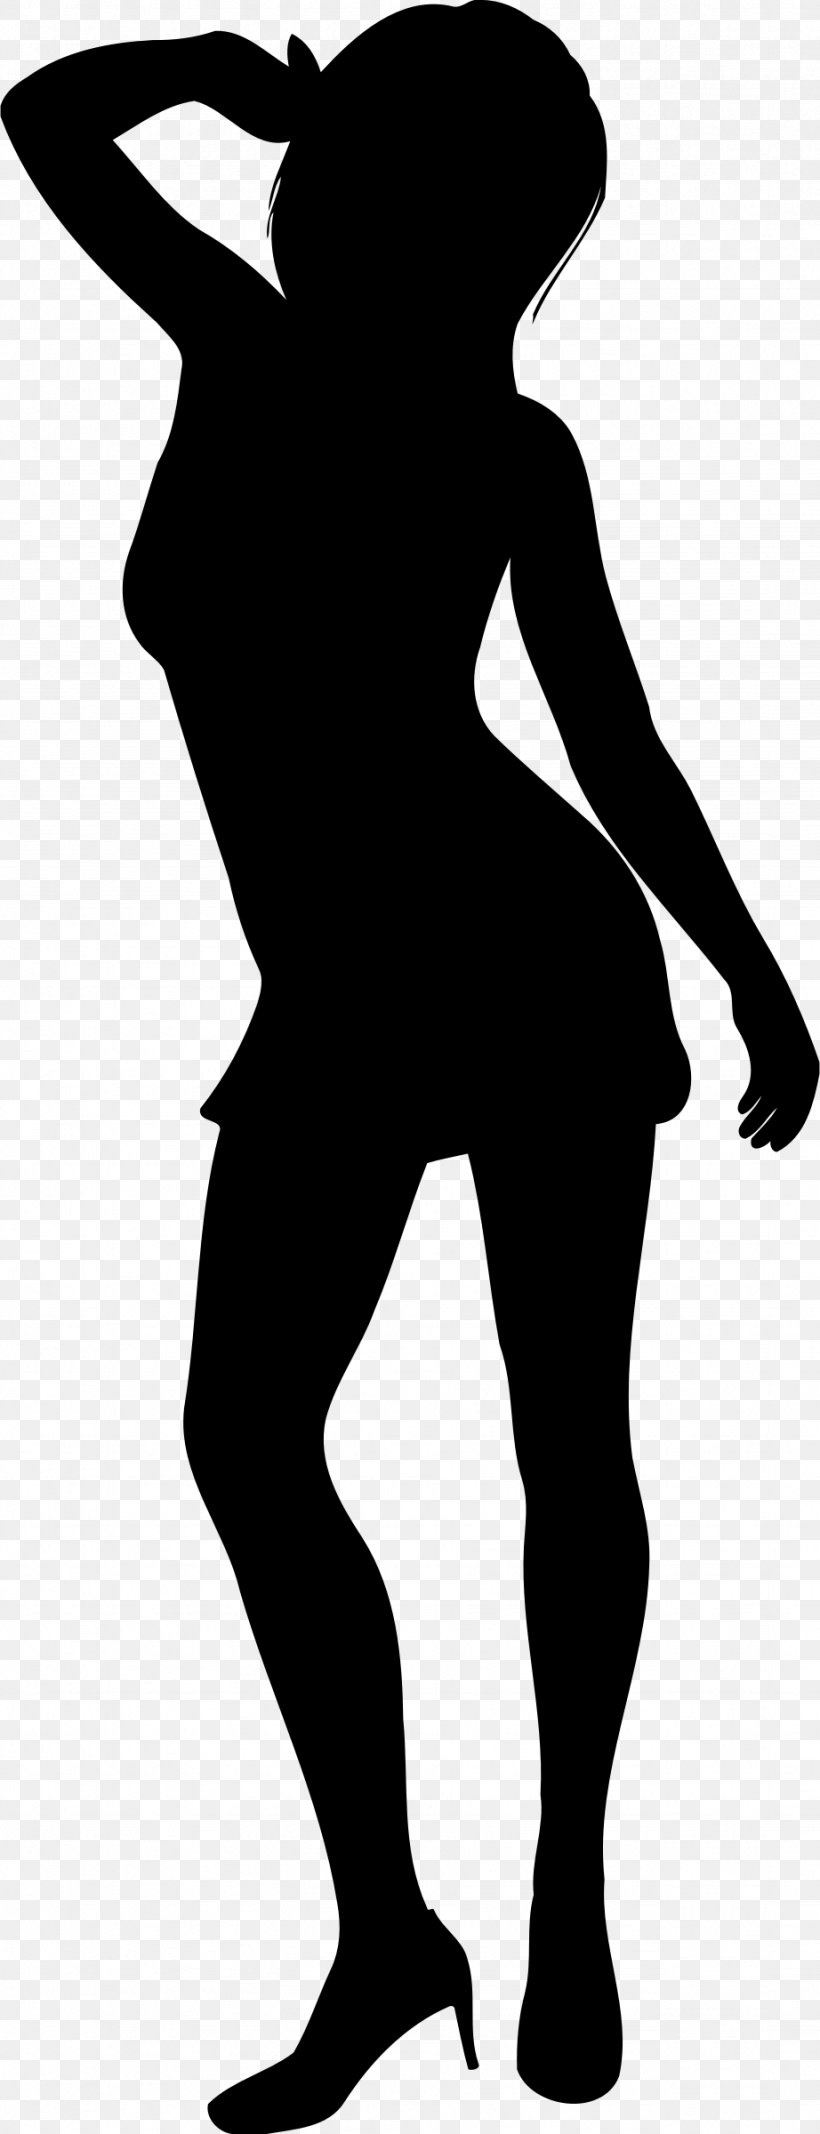 Silhouette Woman Model Clip Art, PNG, 922x2400px, Silhouette, Arm, Art, Black, Black And White Download Free